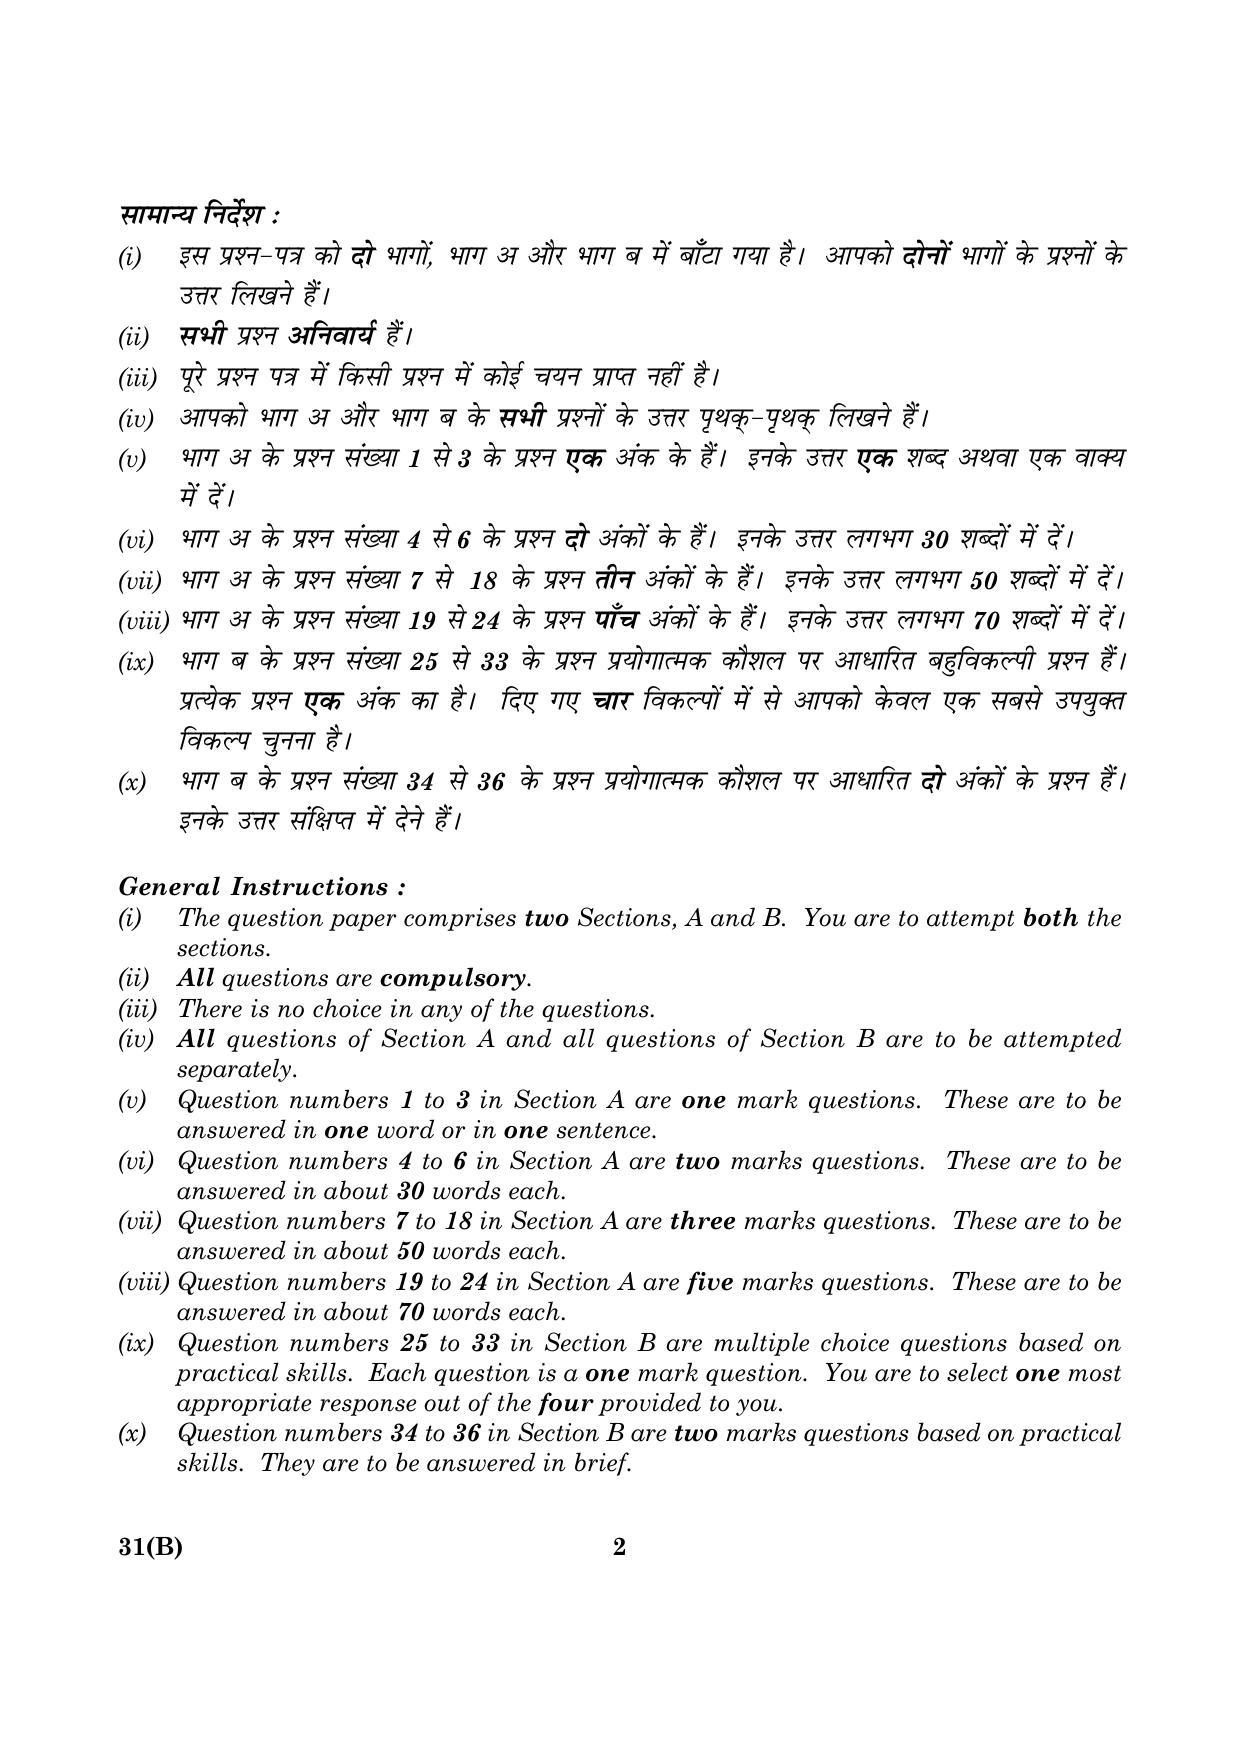 CBSE Class 10 031(B) Science 2016 Question Paper - Page 2